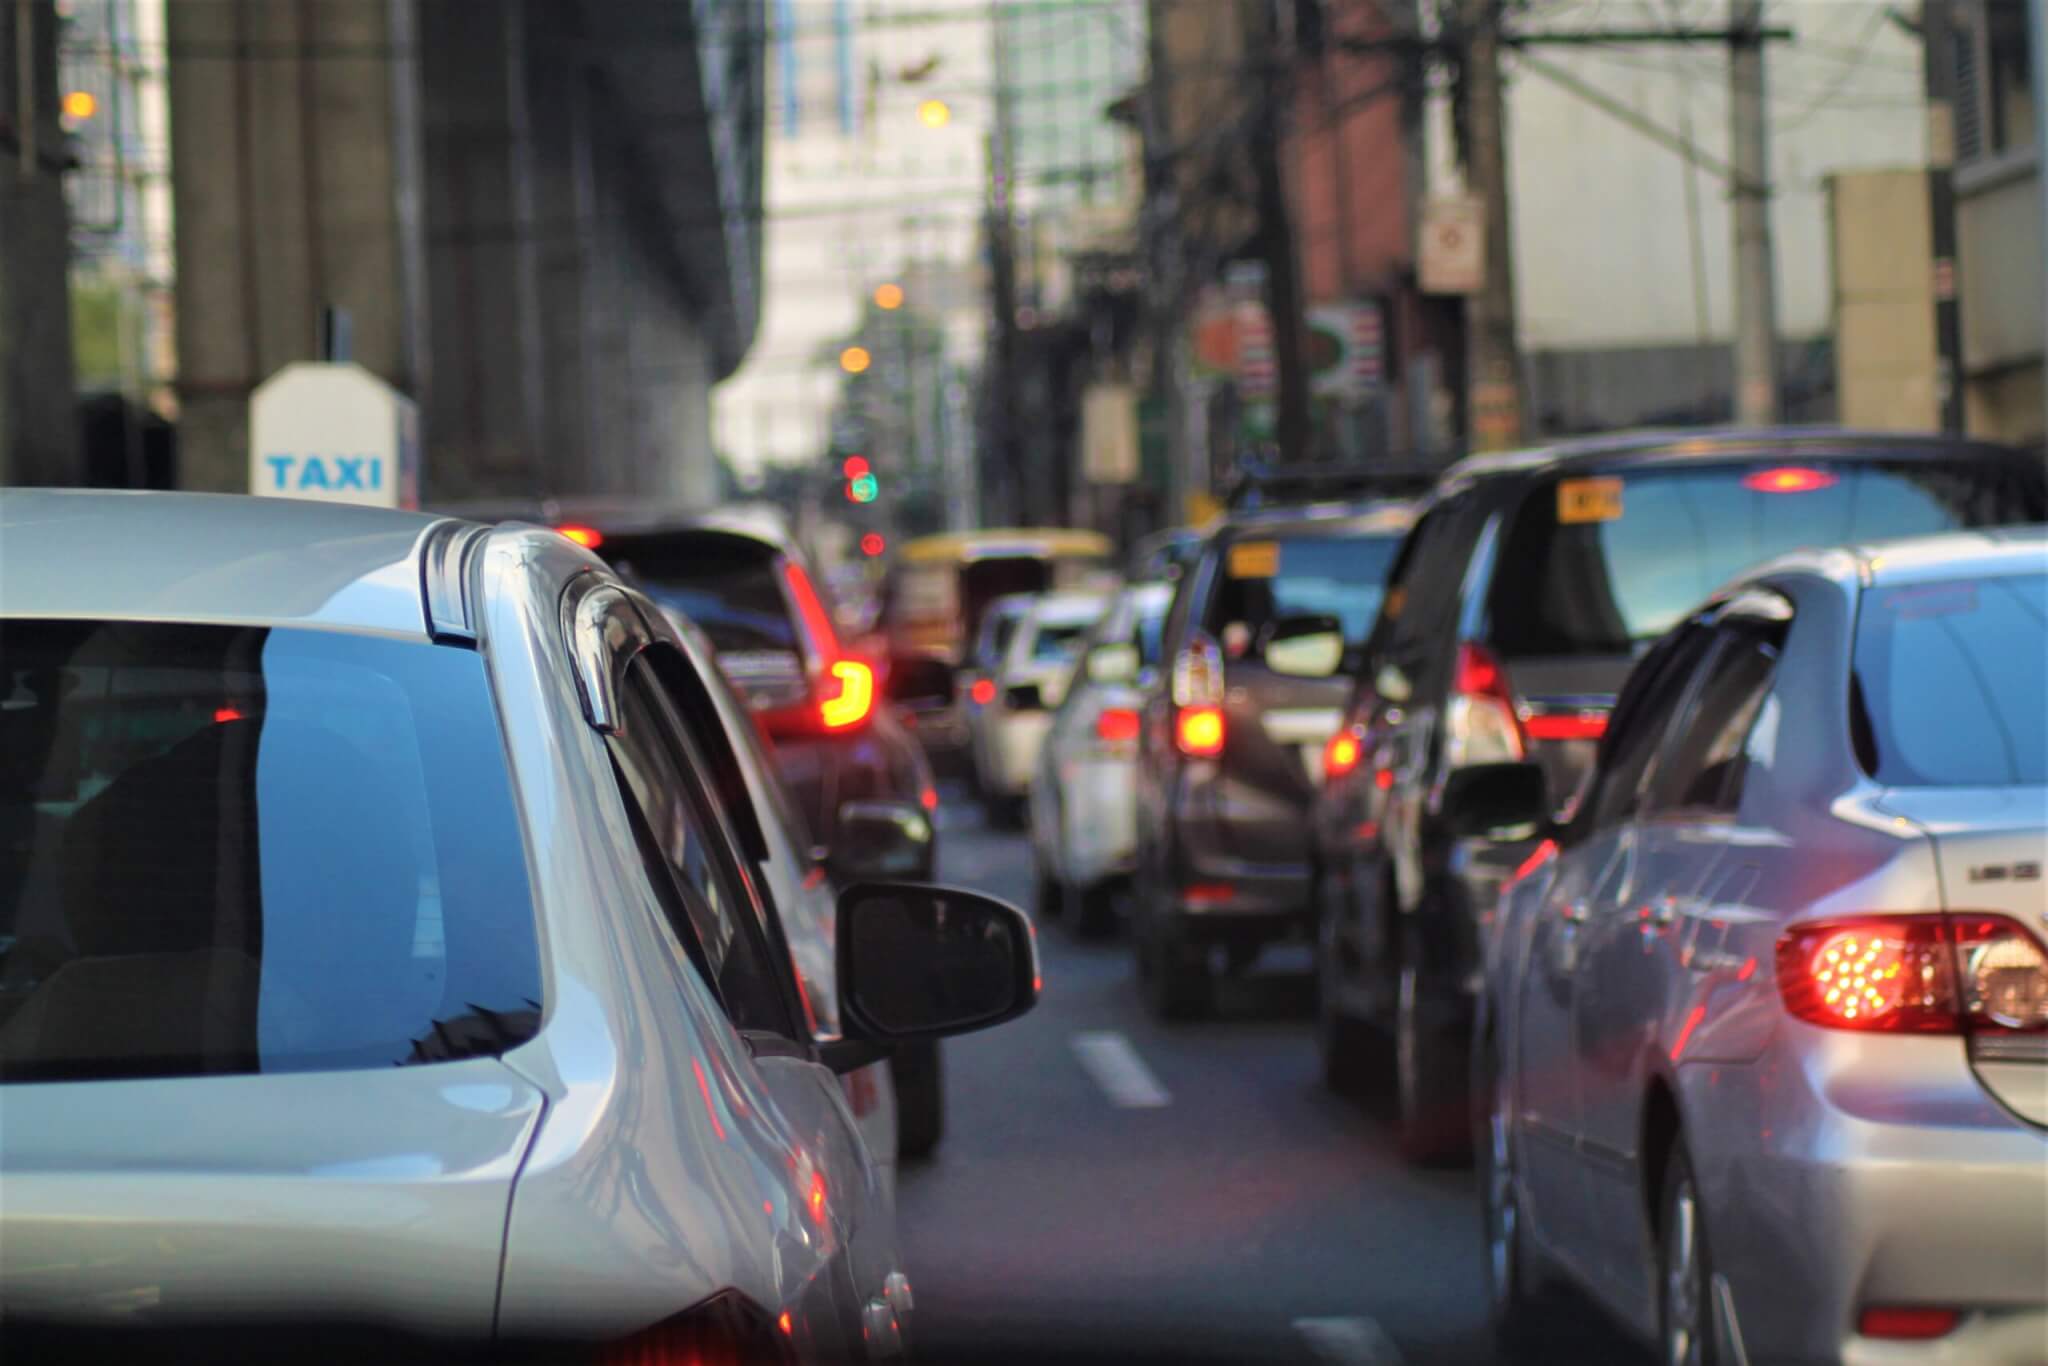 Sitting in traffic for just 2 hours can lead to brain damage - Study Finds